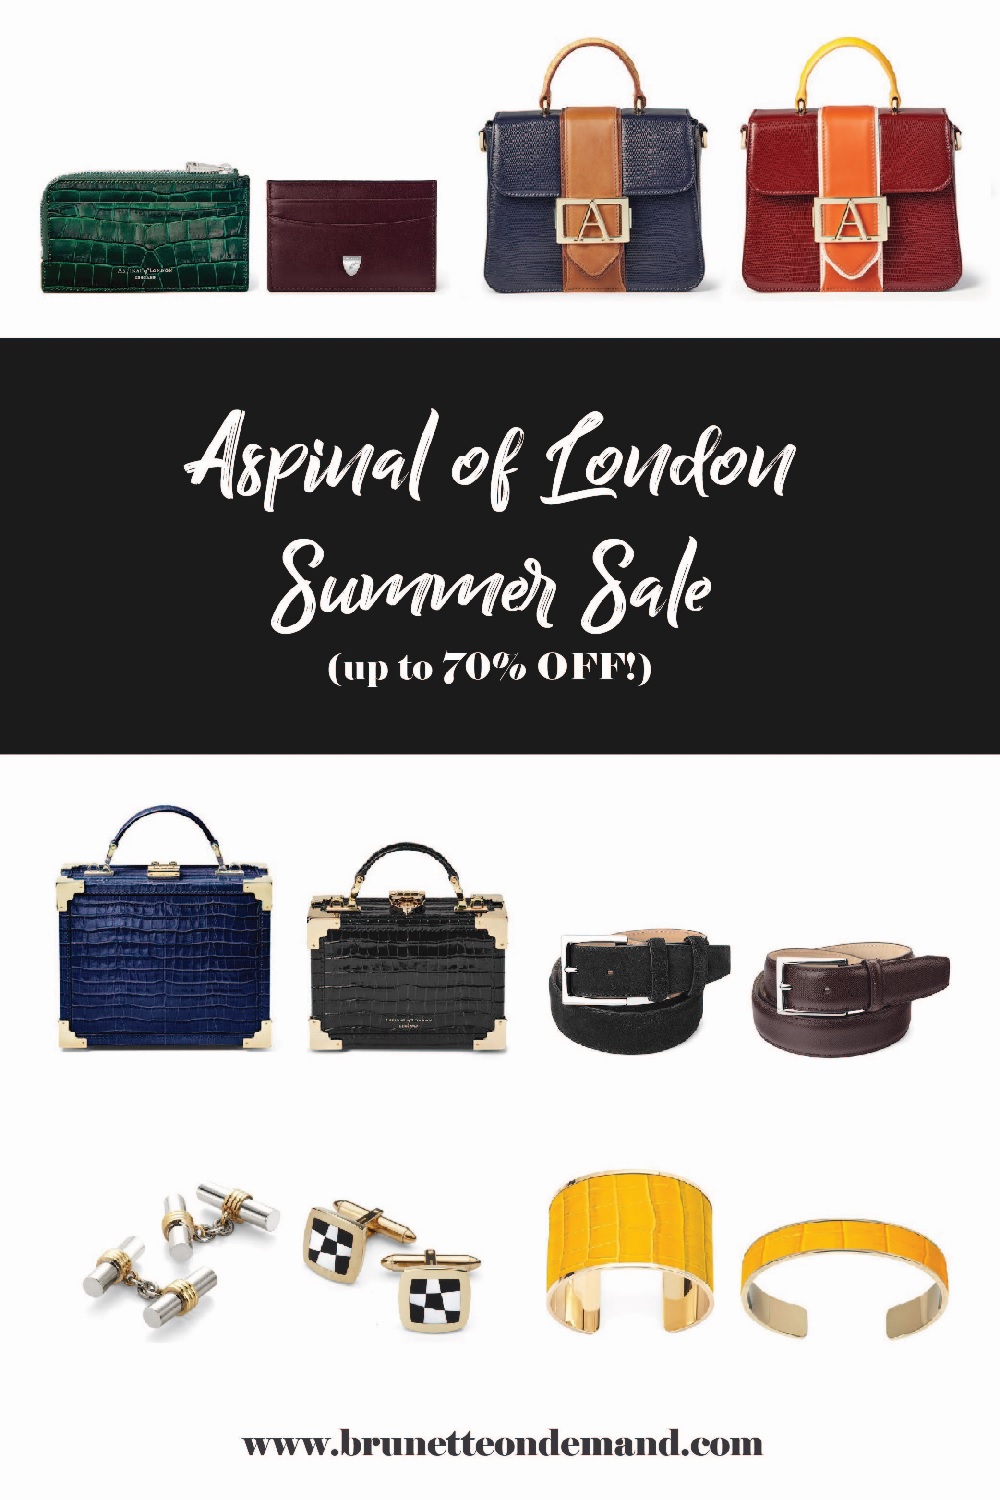 Aspinal of London Summer Sale women's and men's handbags and accessories